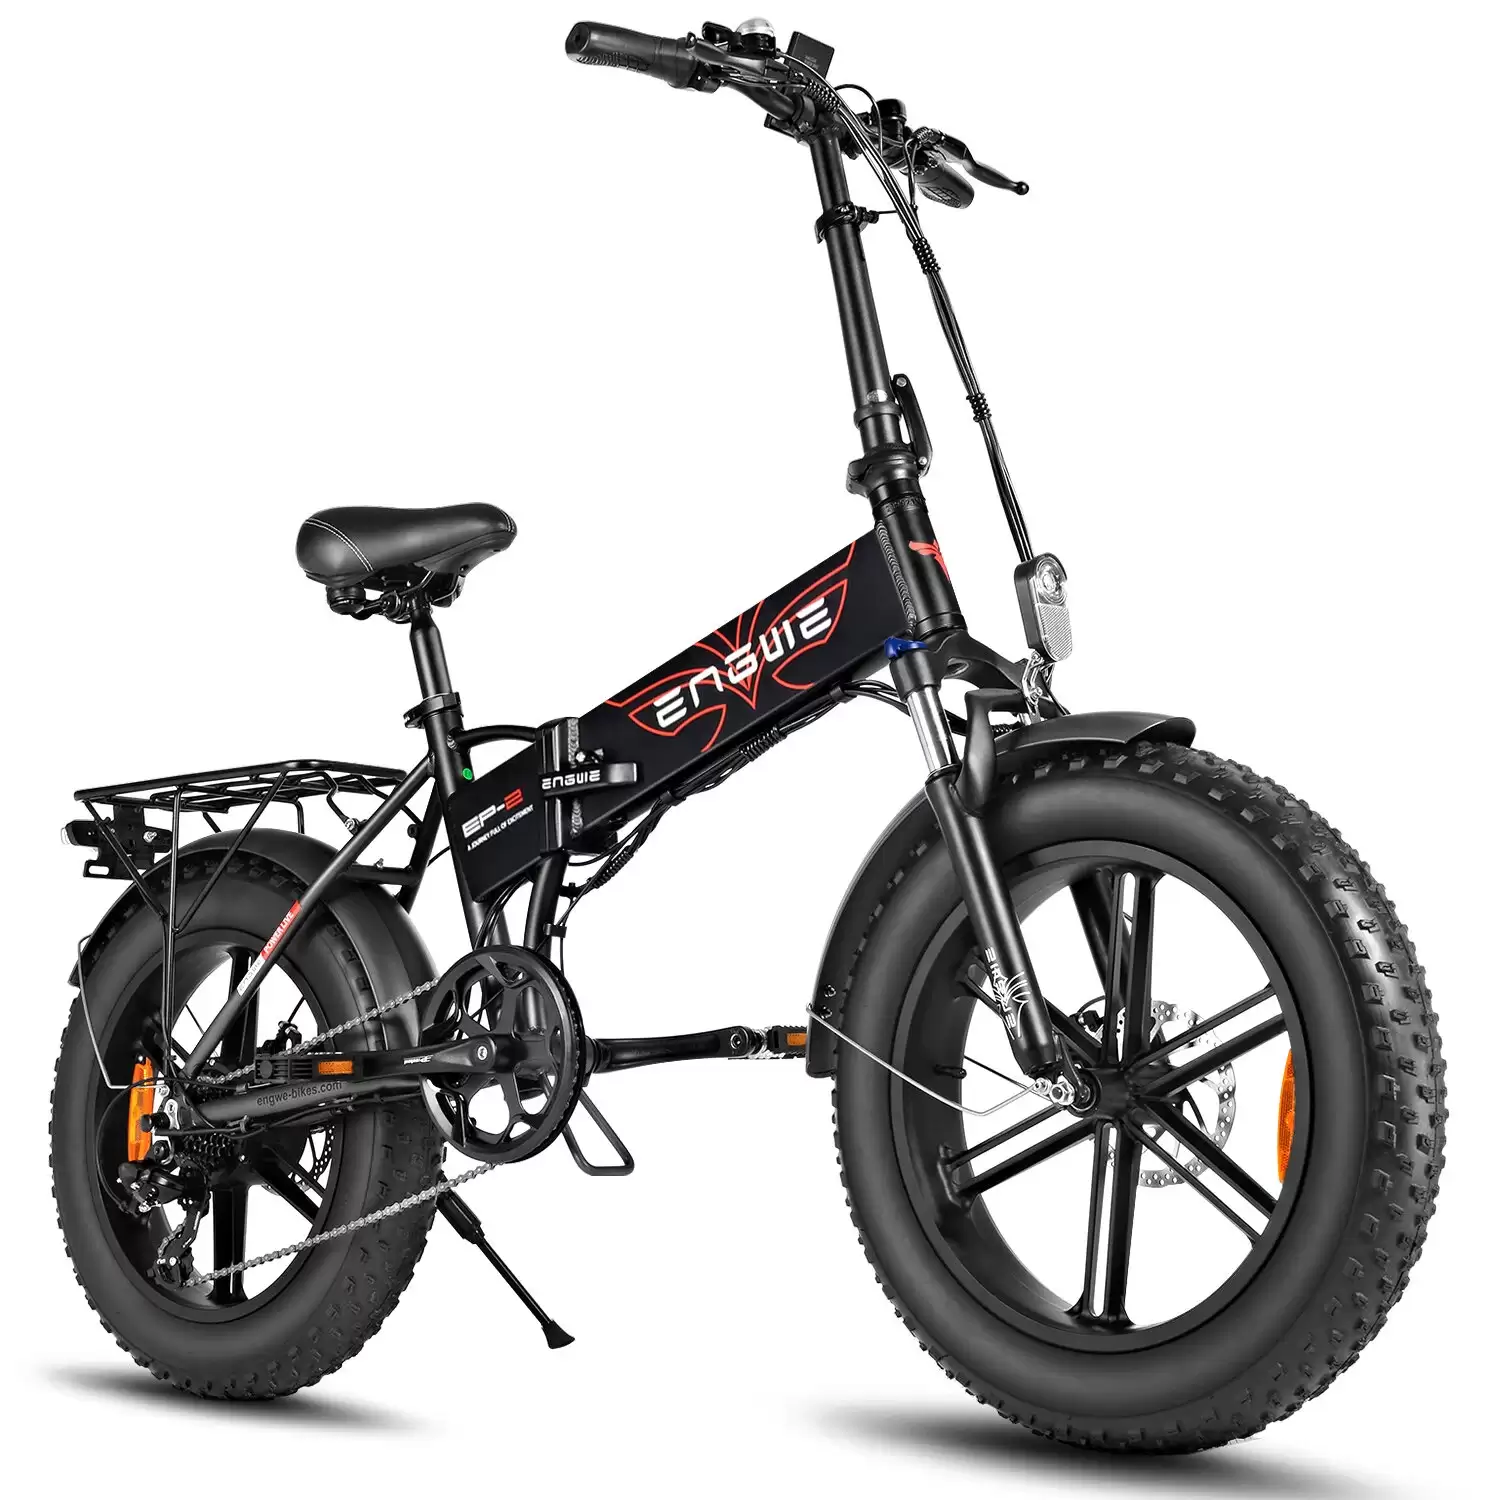 Order In Just $1,088.93 [eu Direct] Engwe Ep-2 Pro 12.8ah 750w Fat Tire Folding Electric Bike With This Coupon At Banggood